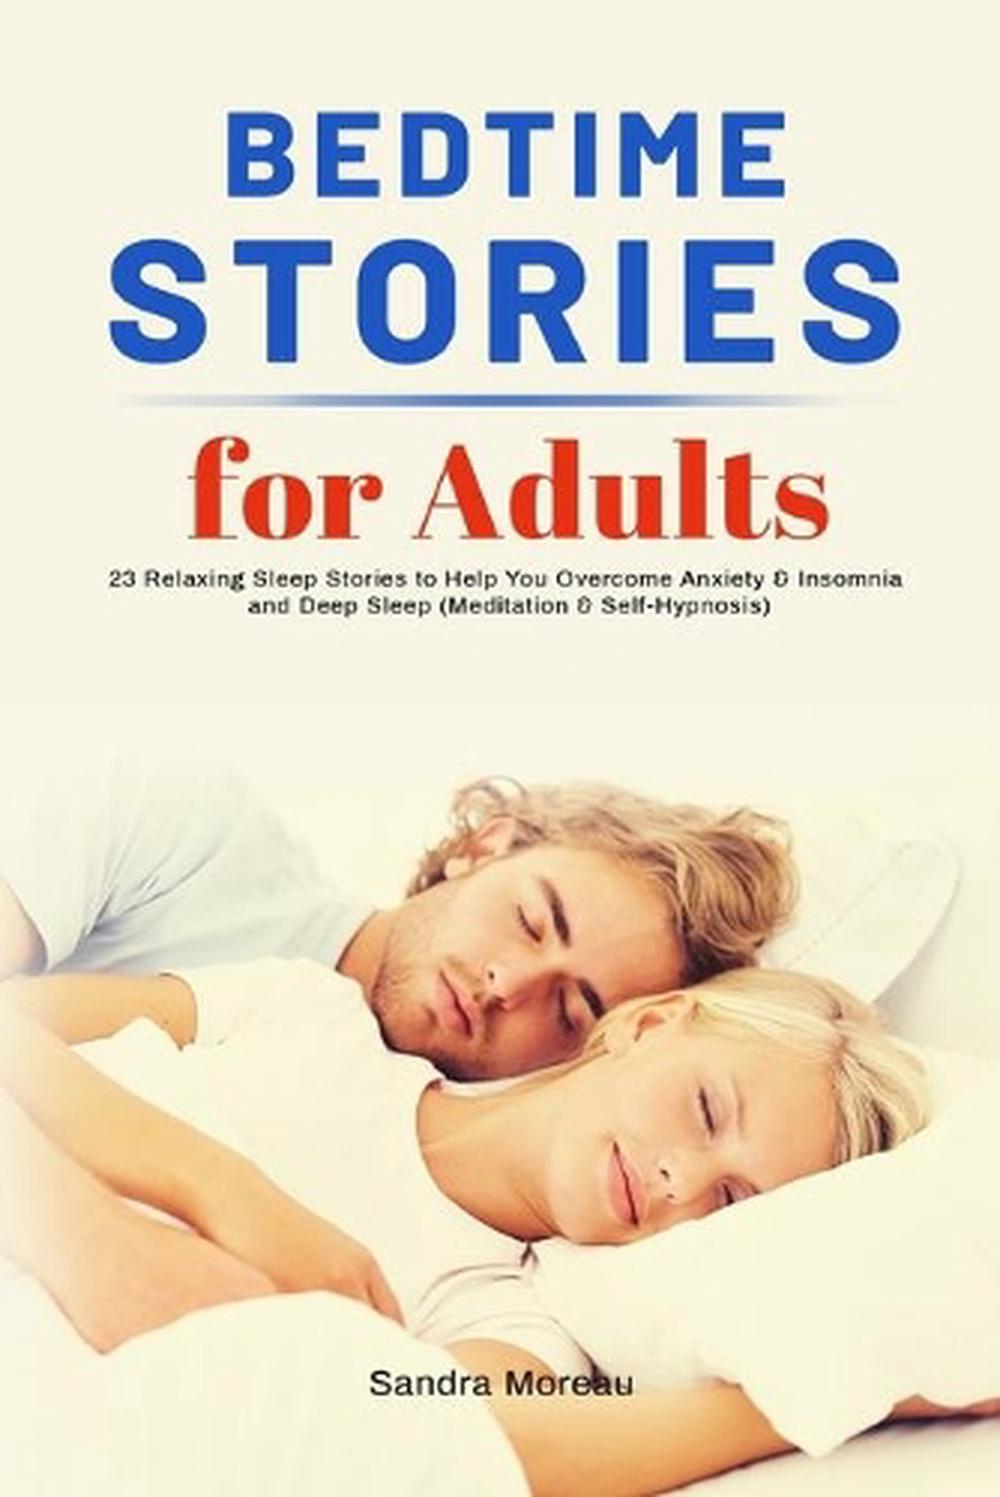 Bedtime Stories For Adults By Sandra Moreau English Paperback Book Free Shippi 9781953732576